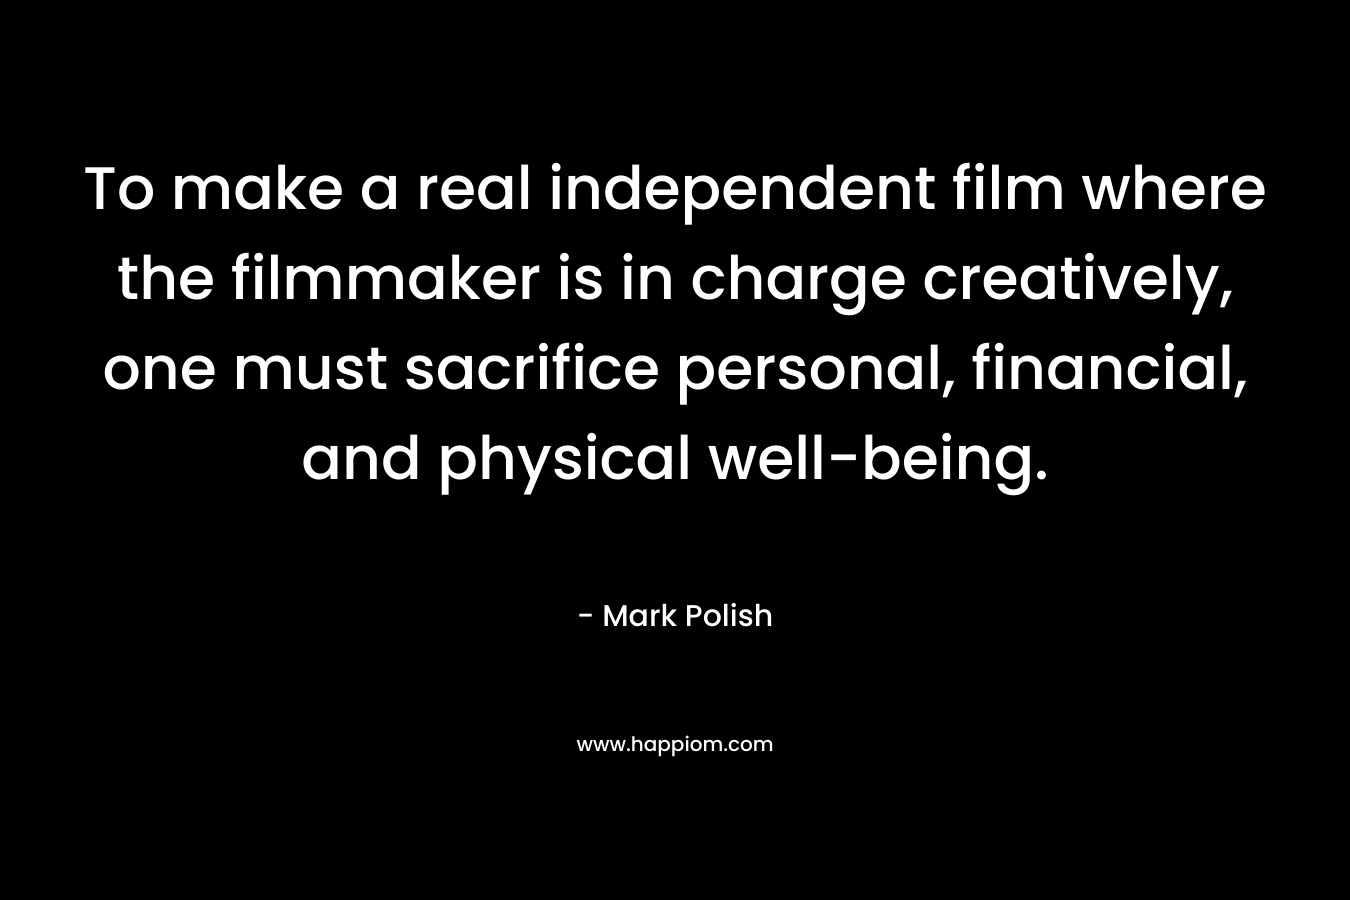 To make a real independent film where the filmmaker is in charge creatively, one must sacrifice personal, financial, and physical well-being. – Mark Polish